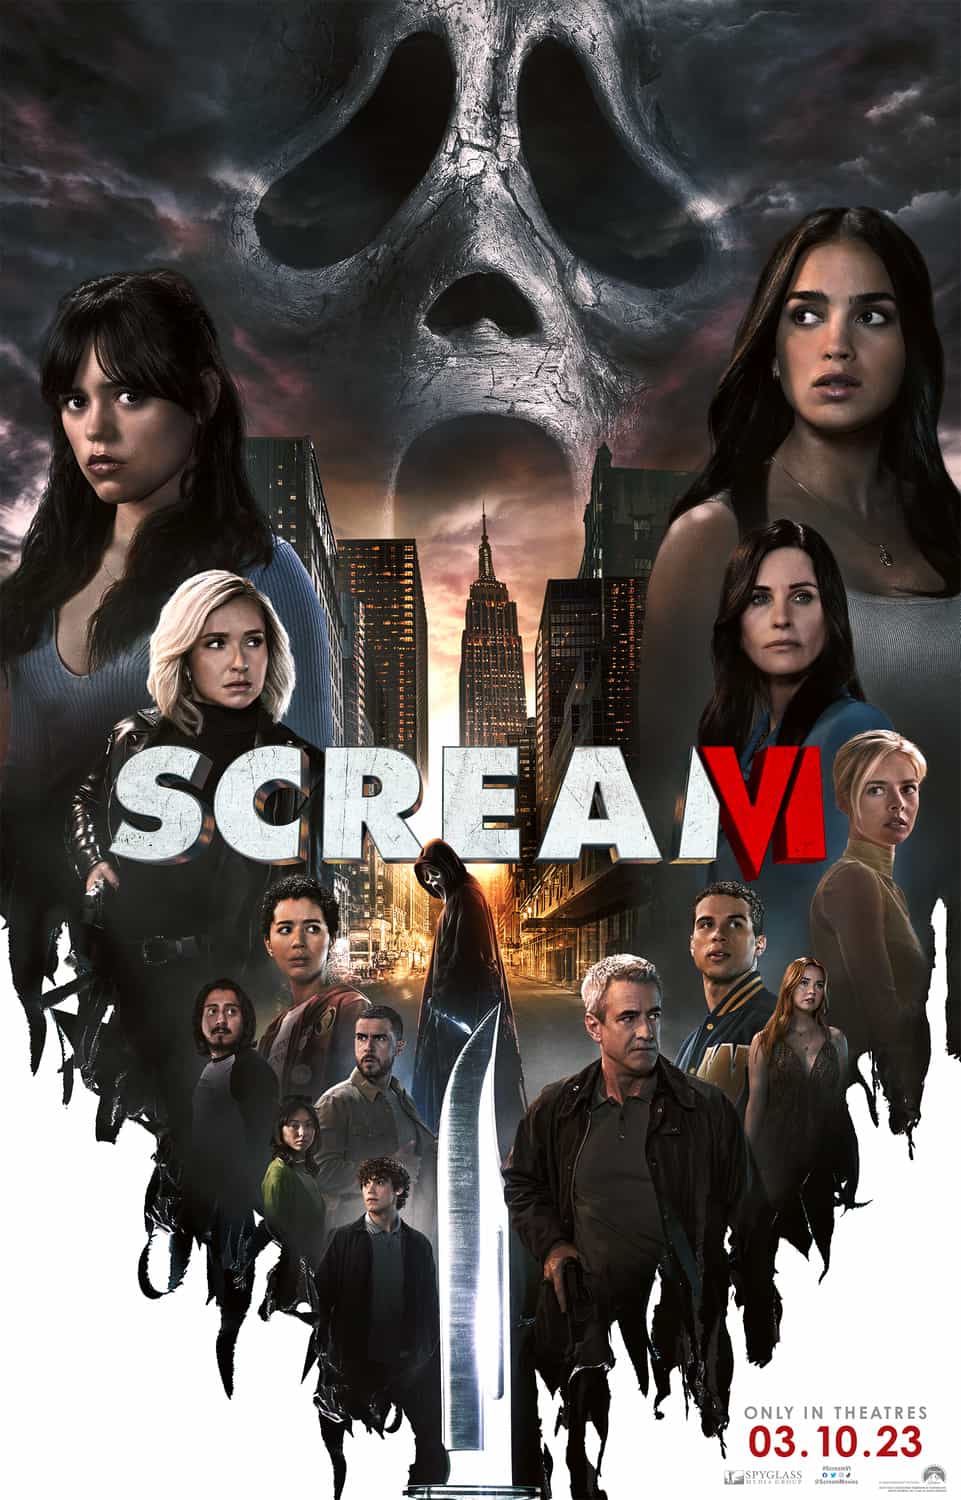 This weeks UK new movie preview 10th March 2023 - Scream VI, Winnie-The-Pooh: Blood and Honey, Champions, 65 and Luther - #screamvi #winniethepoohbloodandhoney #champions #65 #luther